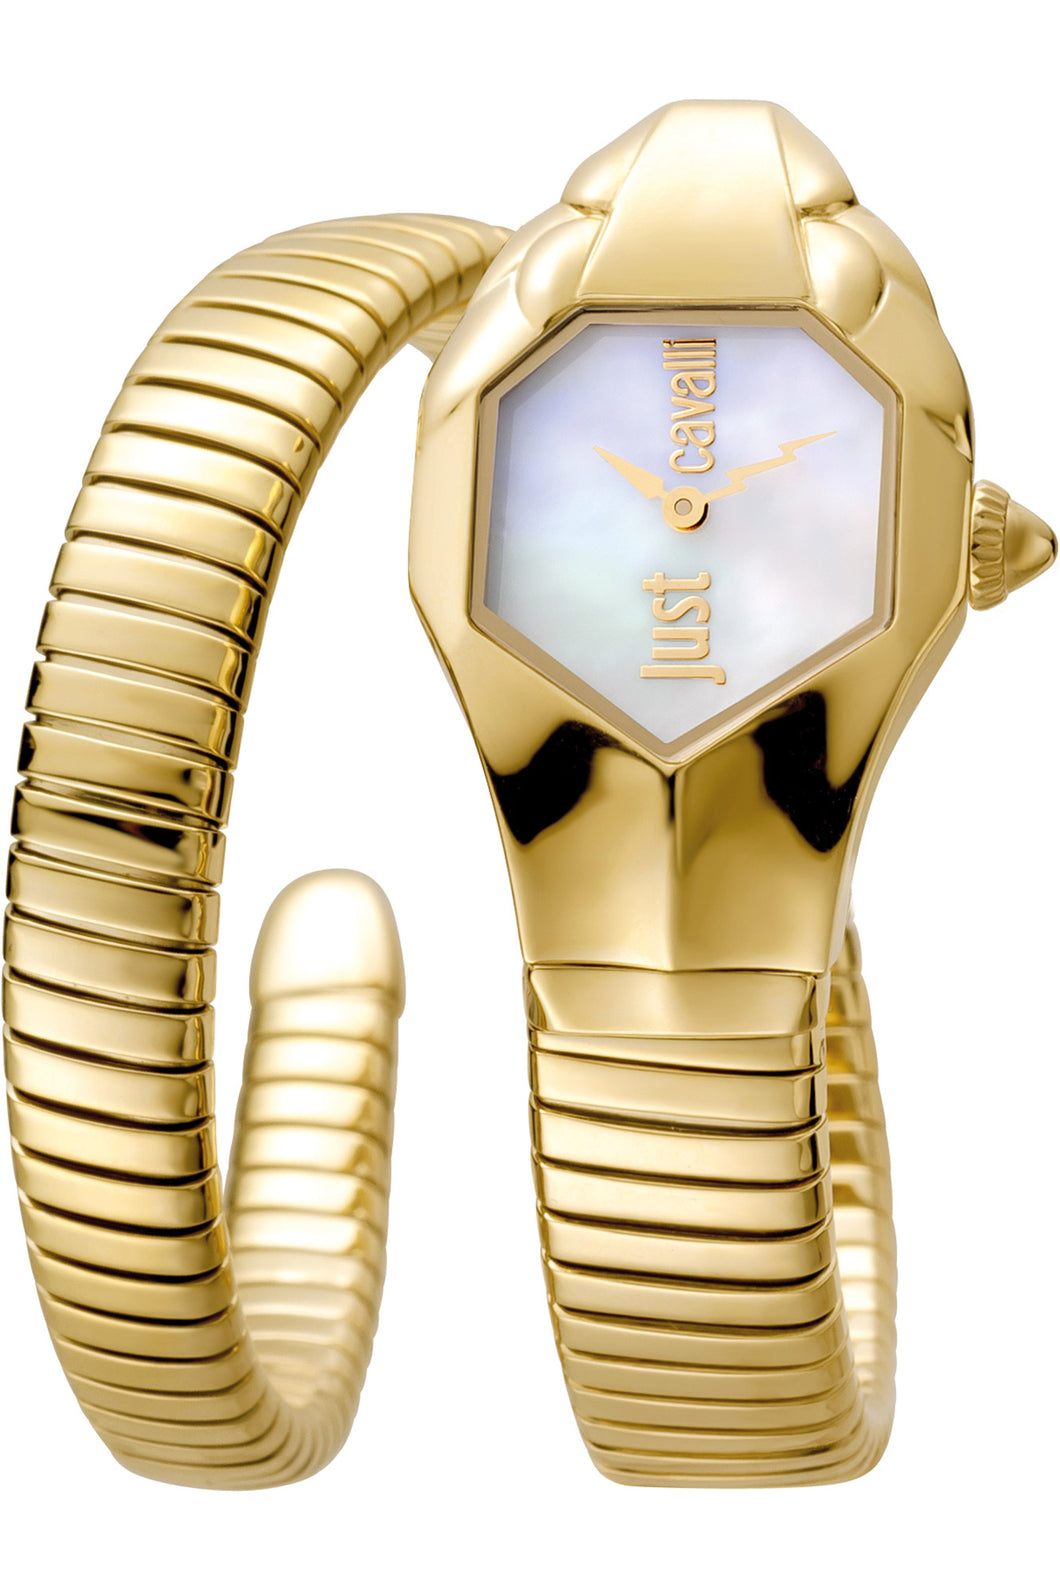 Just Cavalli Lady Snake - JC1L001M0025 Gold Watch Analogue Water Resistant